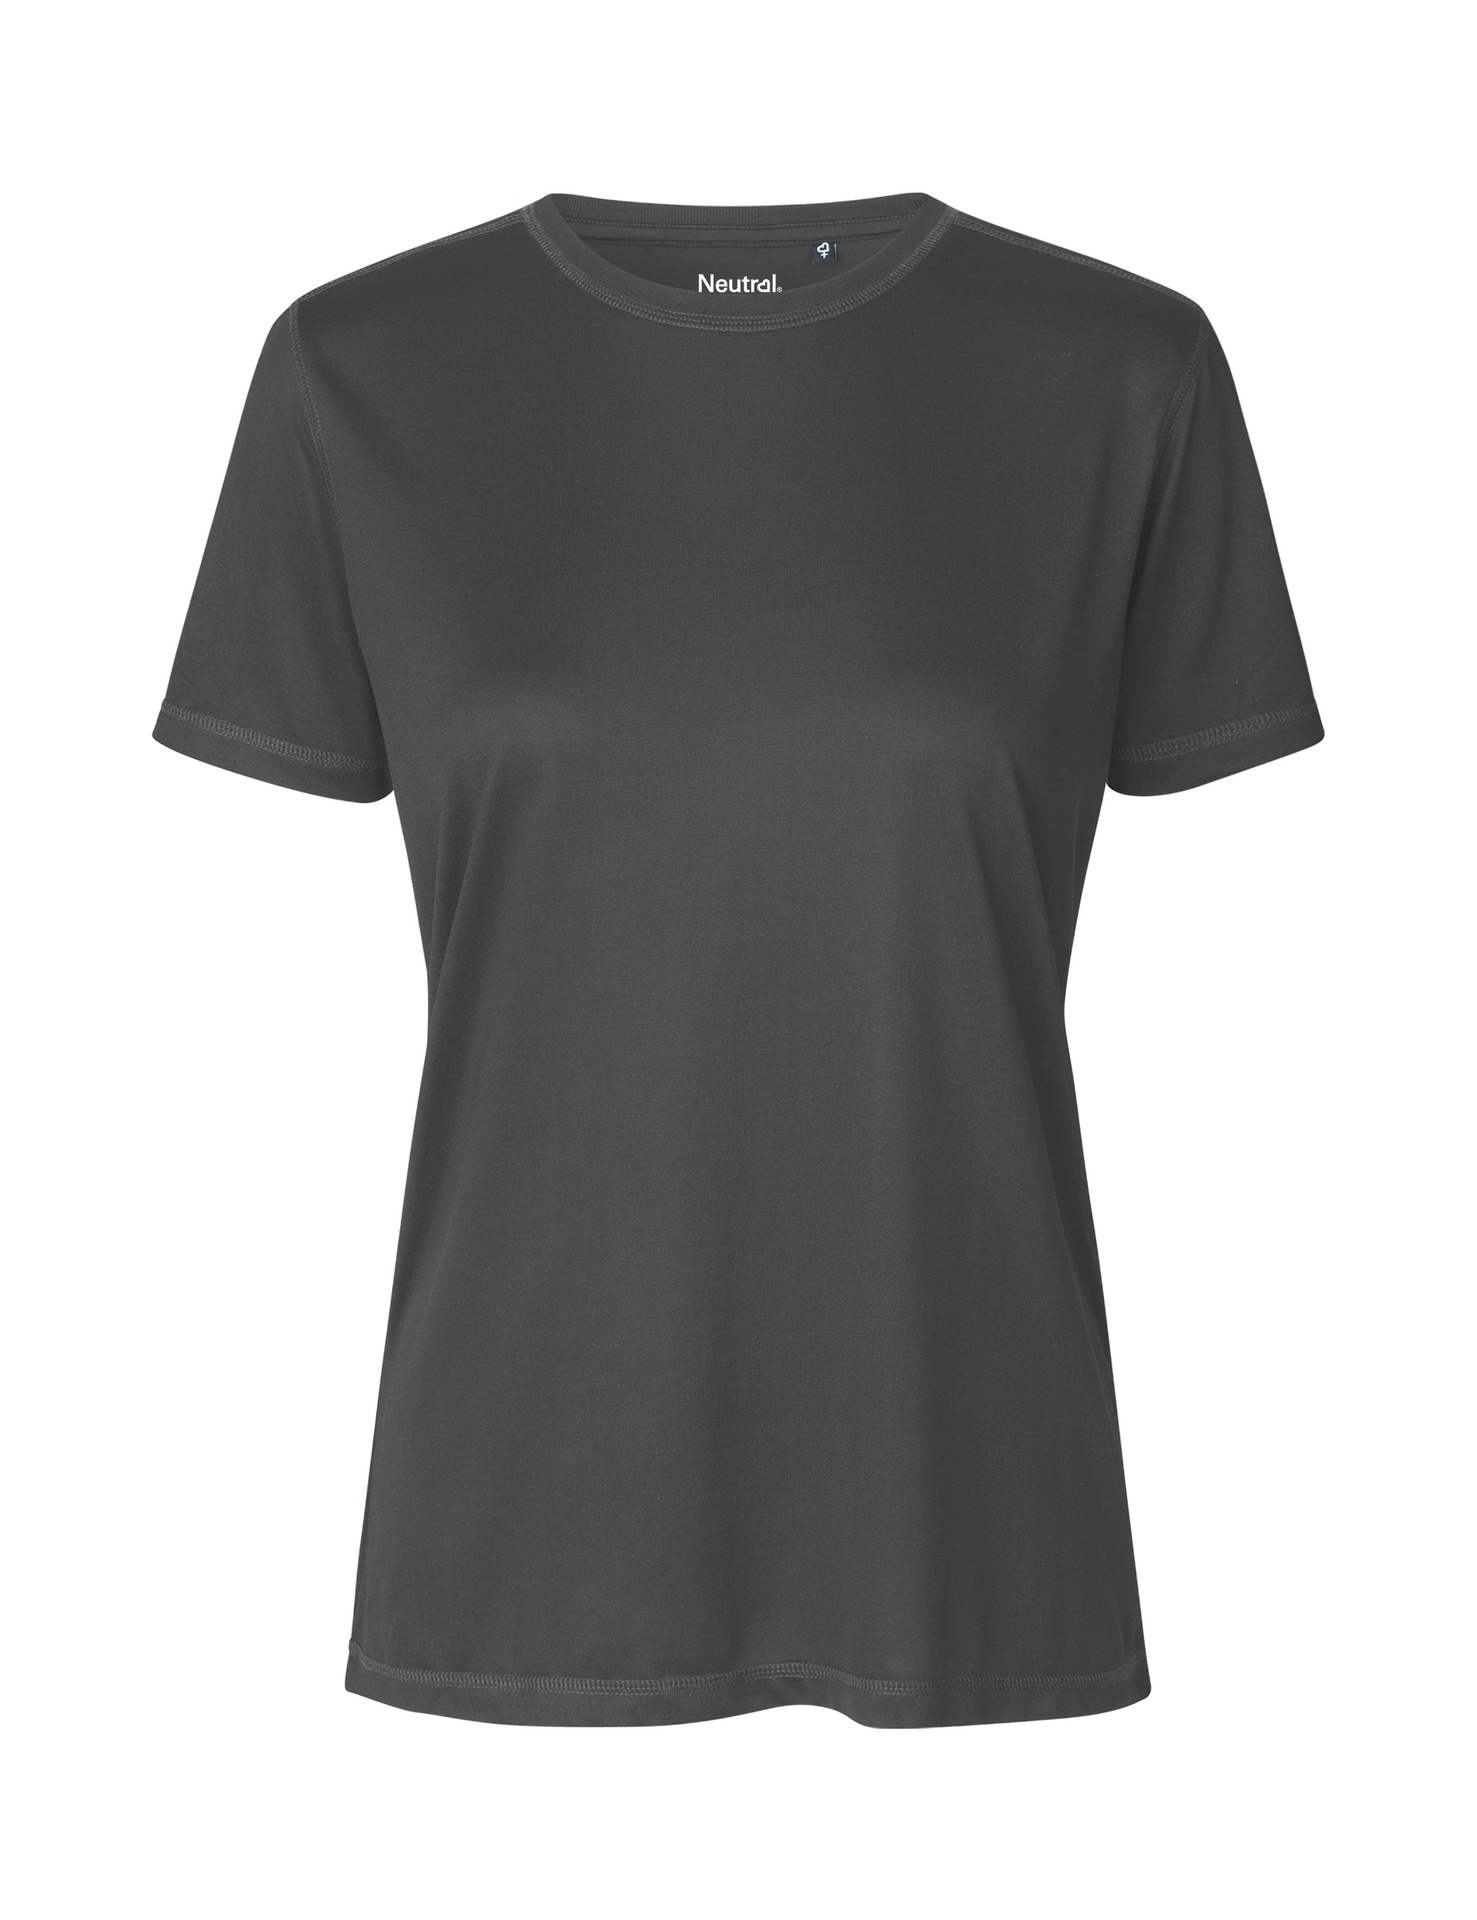 [PR/05216] Ladies Recycled Performance T-Shirt (Charcoal 06, XS)